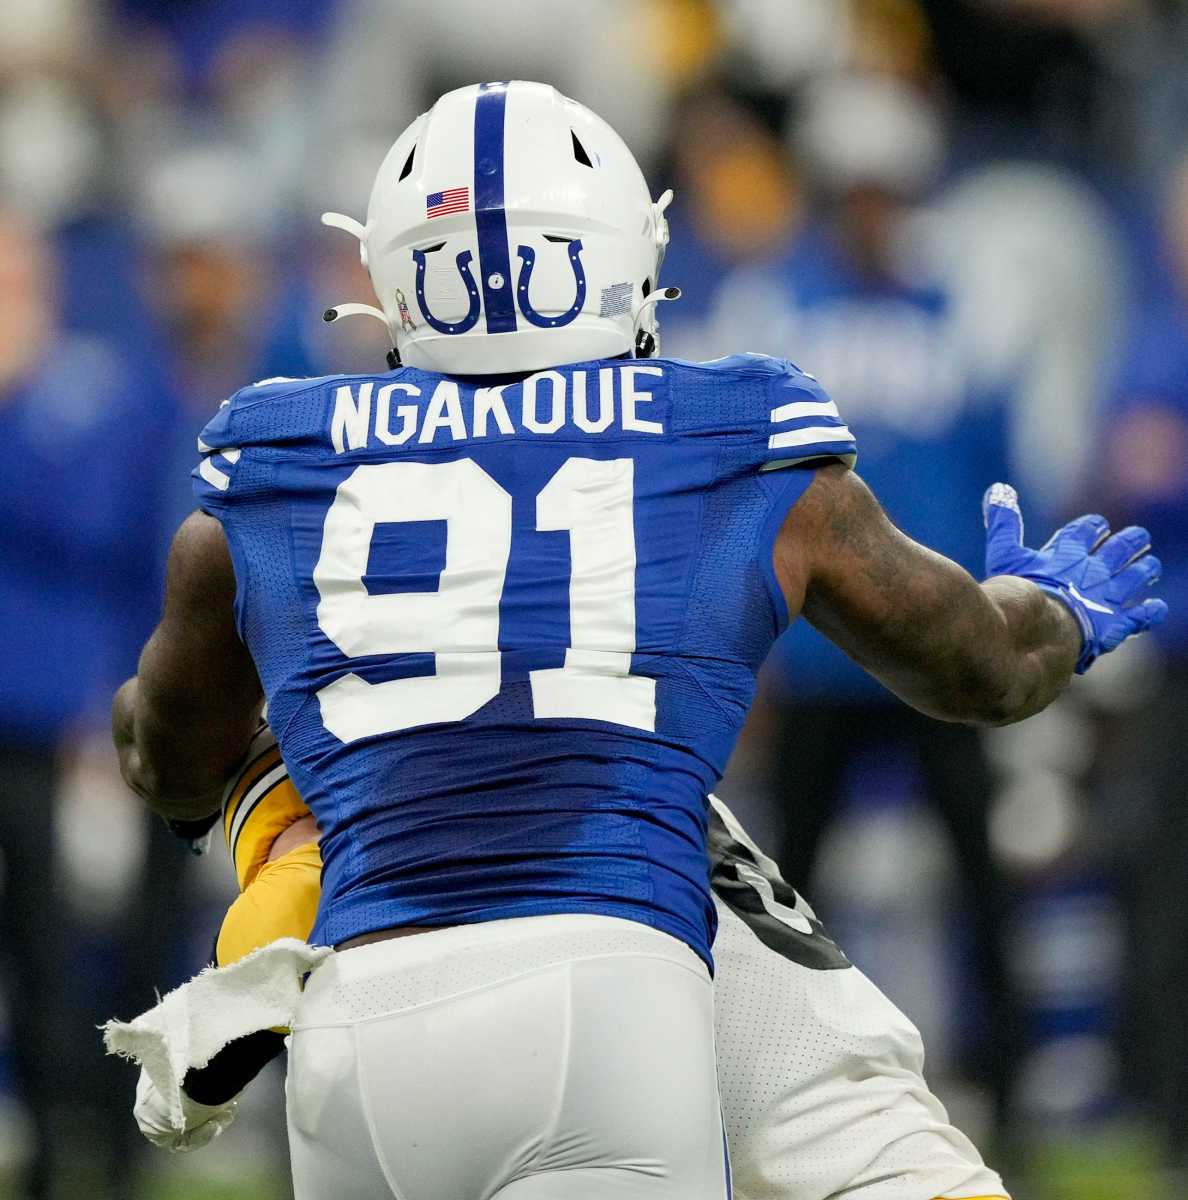 Indianapolis Colts defensive end Yannick Ngakoue (91) moves in to sack Pittsburgh Steelers quarterback Kenny Pickett (8) on Monday, Nov. 28, 2022, during a game against the Pittsburgh Steelers at Lucas Oil Stadium in Indianapolis.